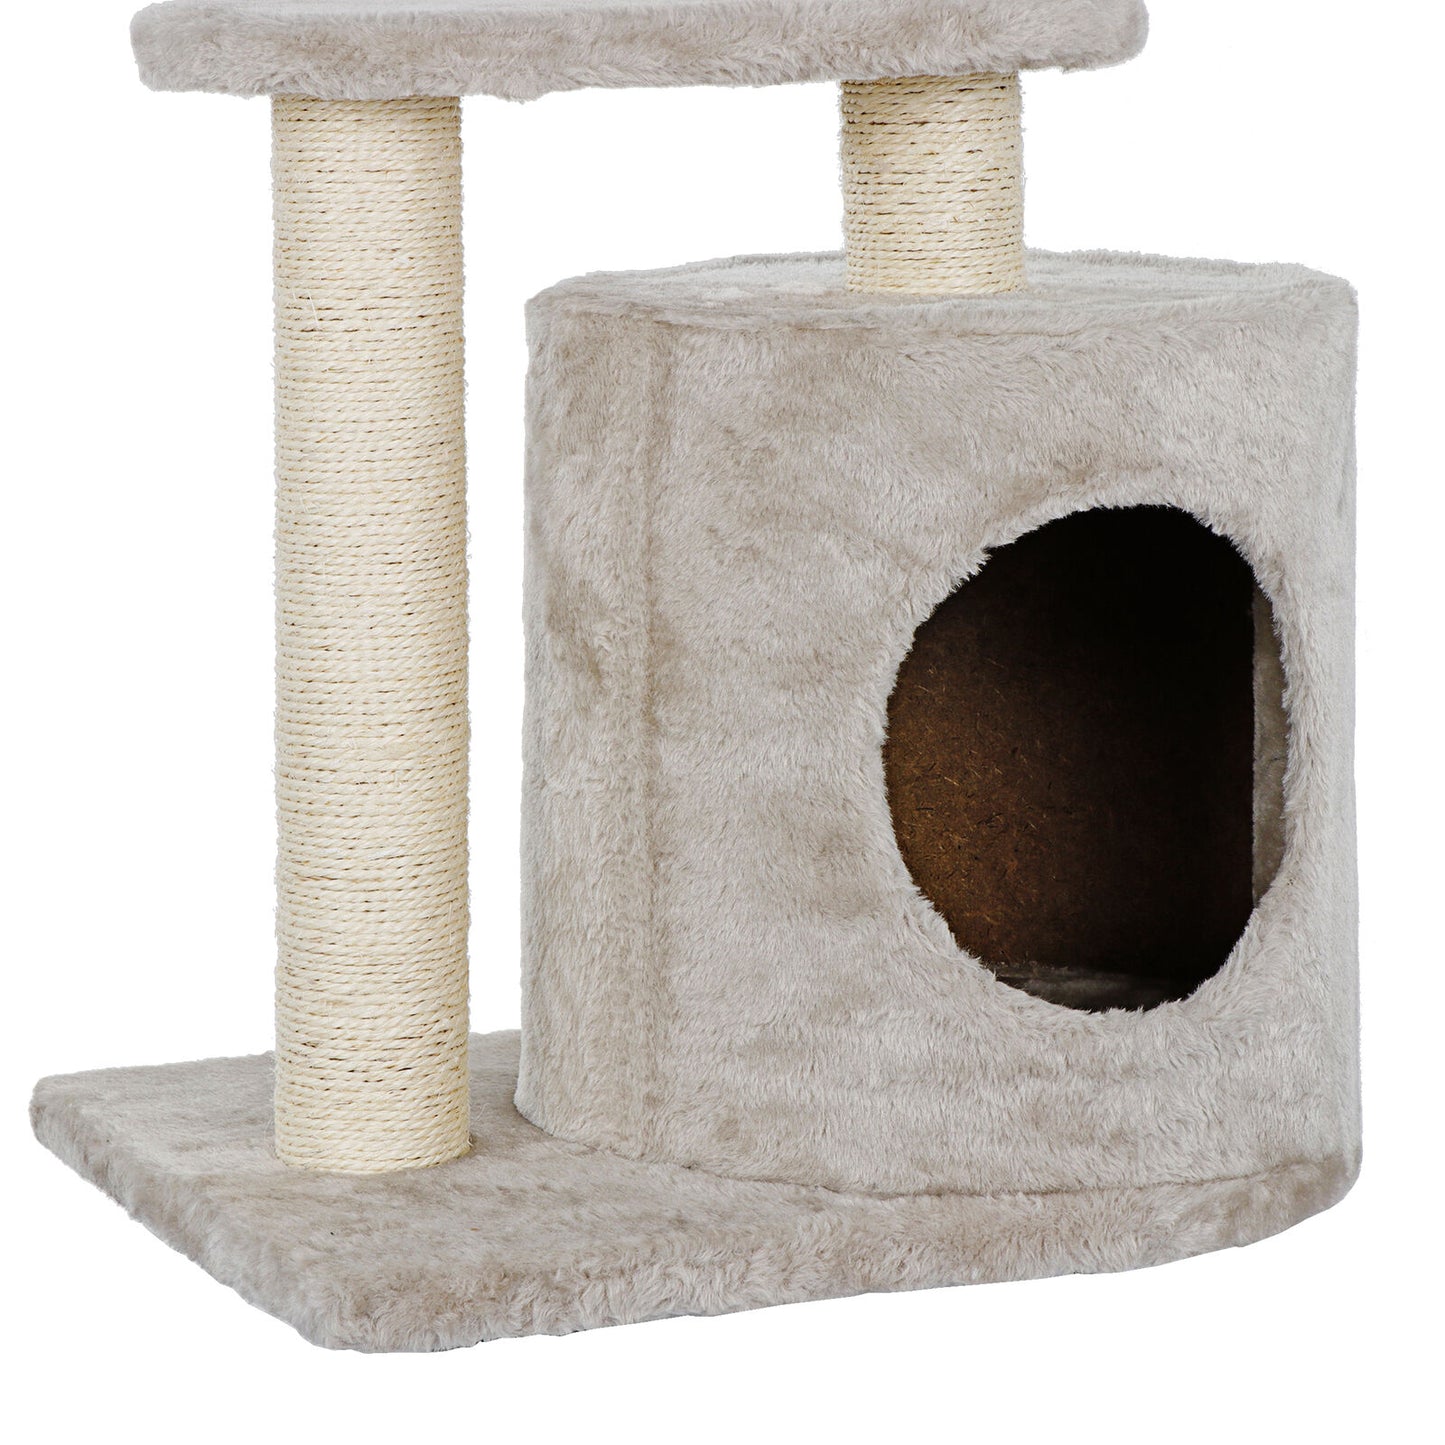 28.7" Cat Tree Activity Tower Pet Kitty Furniture with Cave Scratching Posts